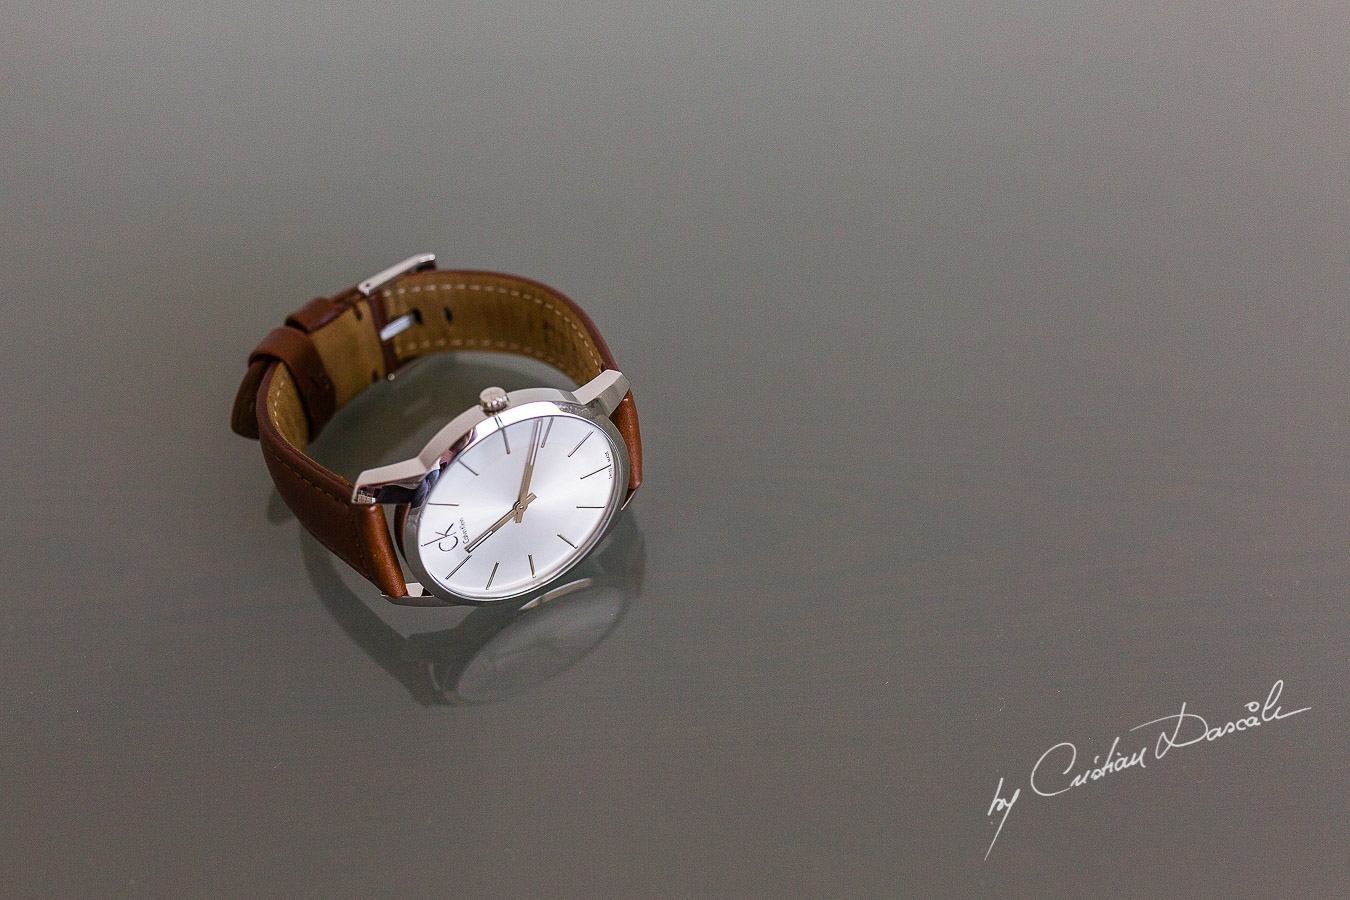 Groom's watch captured at an elegant and romantic wedding at Elias Beach Hotel by Cristian Dascalu.